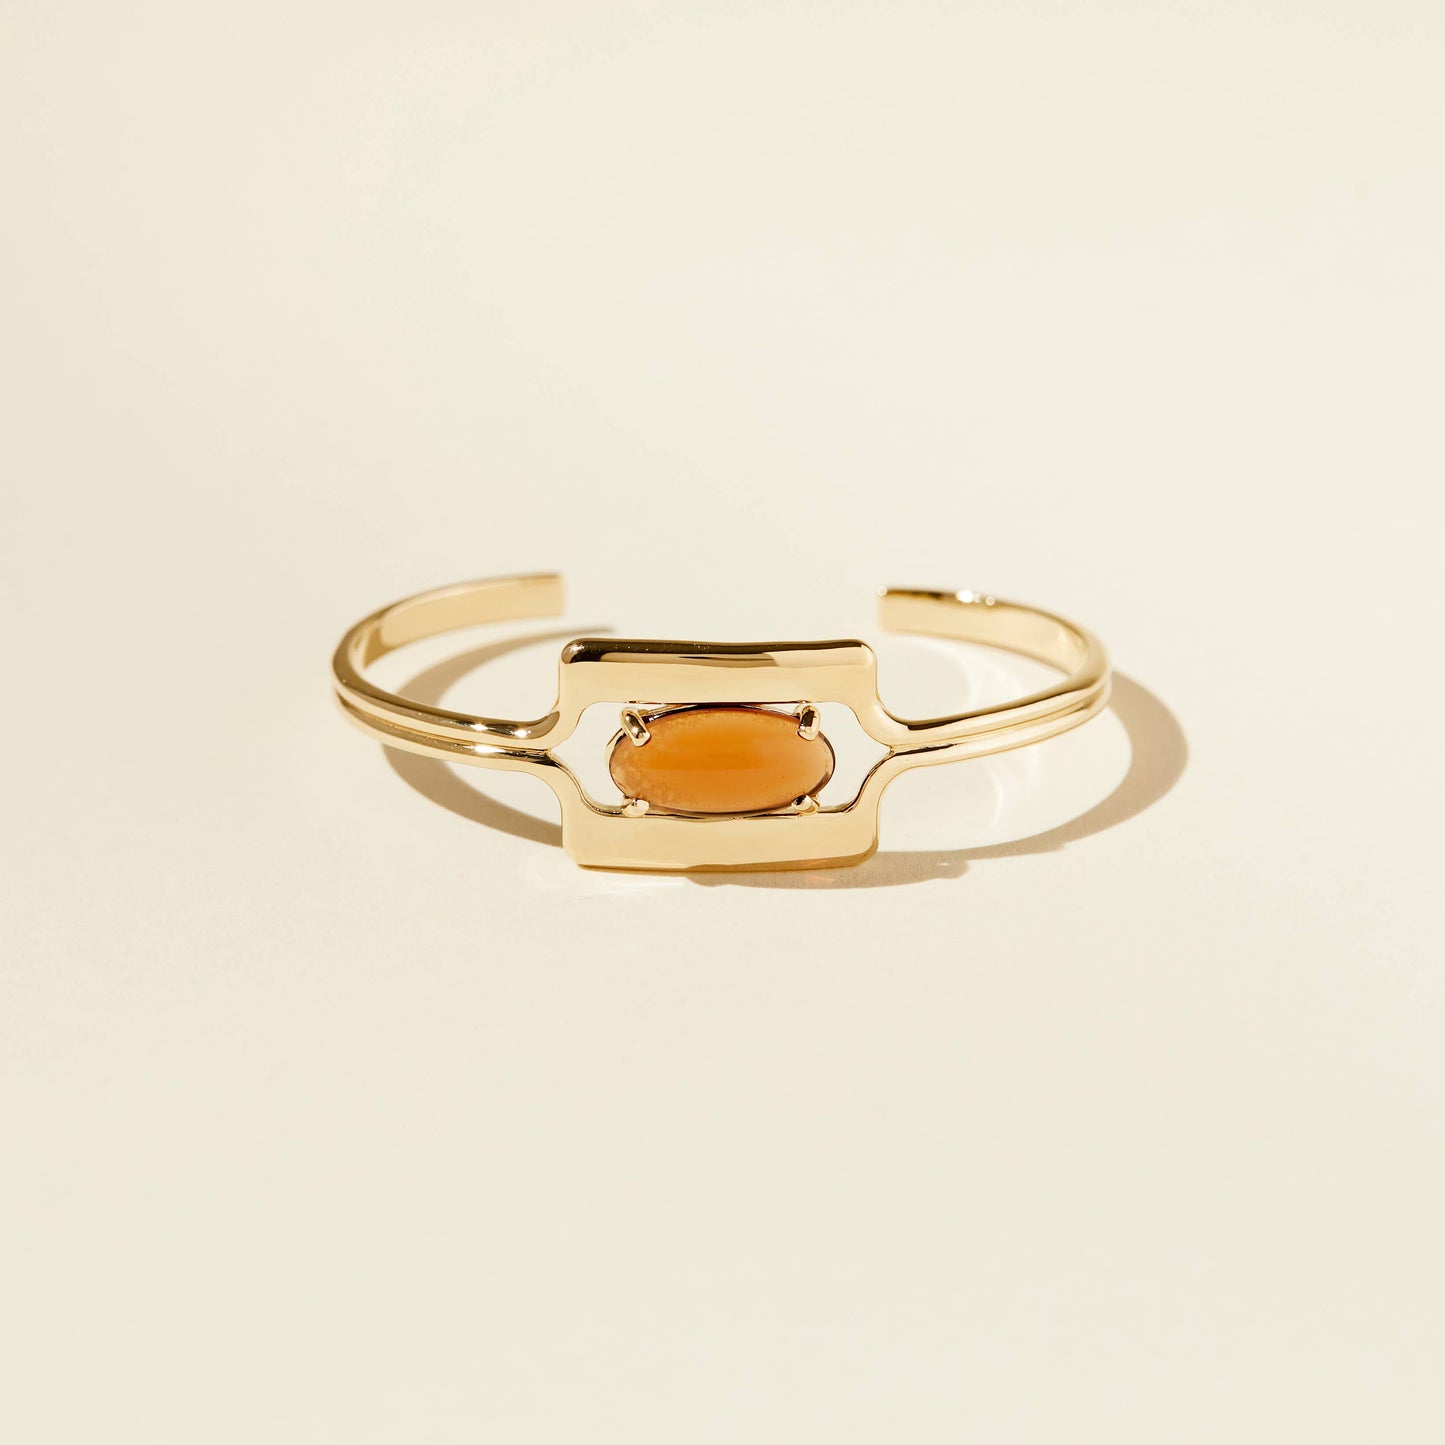 front view of the walton cuff bracelet with an amber brown glass cabochon on a beige background